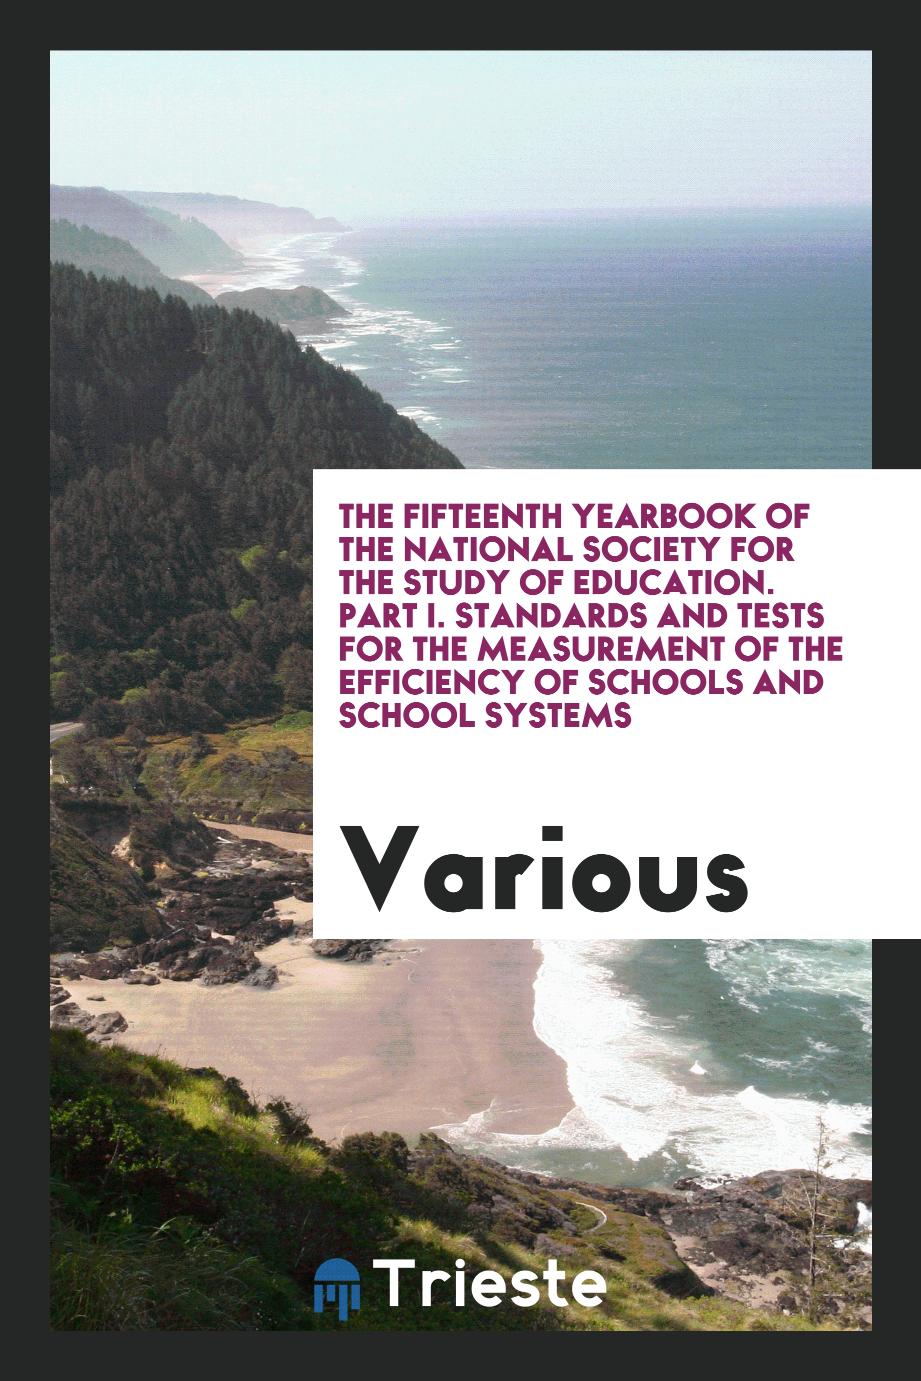 The Fifteenth Yearbook of the National Society for the Study of Education. Part I. Standards and Tests for the Measurement of the Efficiency of Schools and School Systems